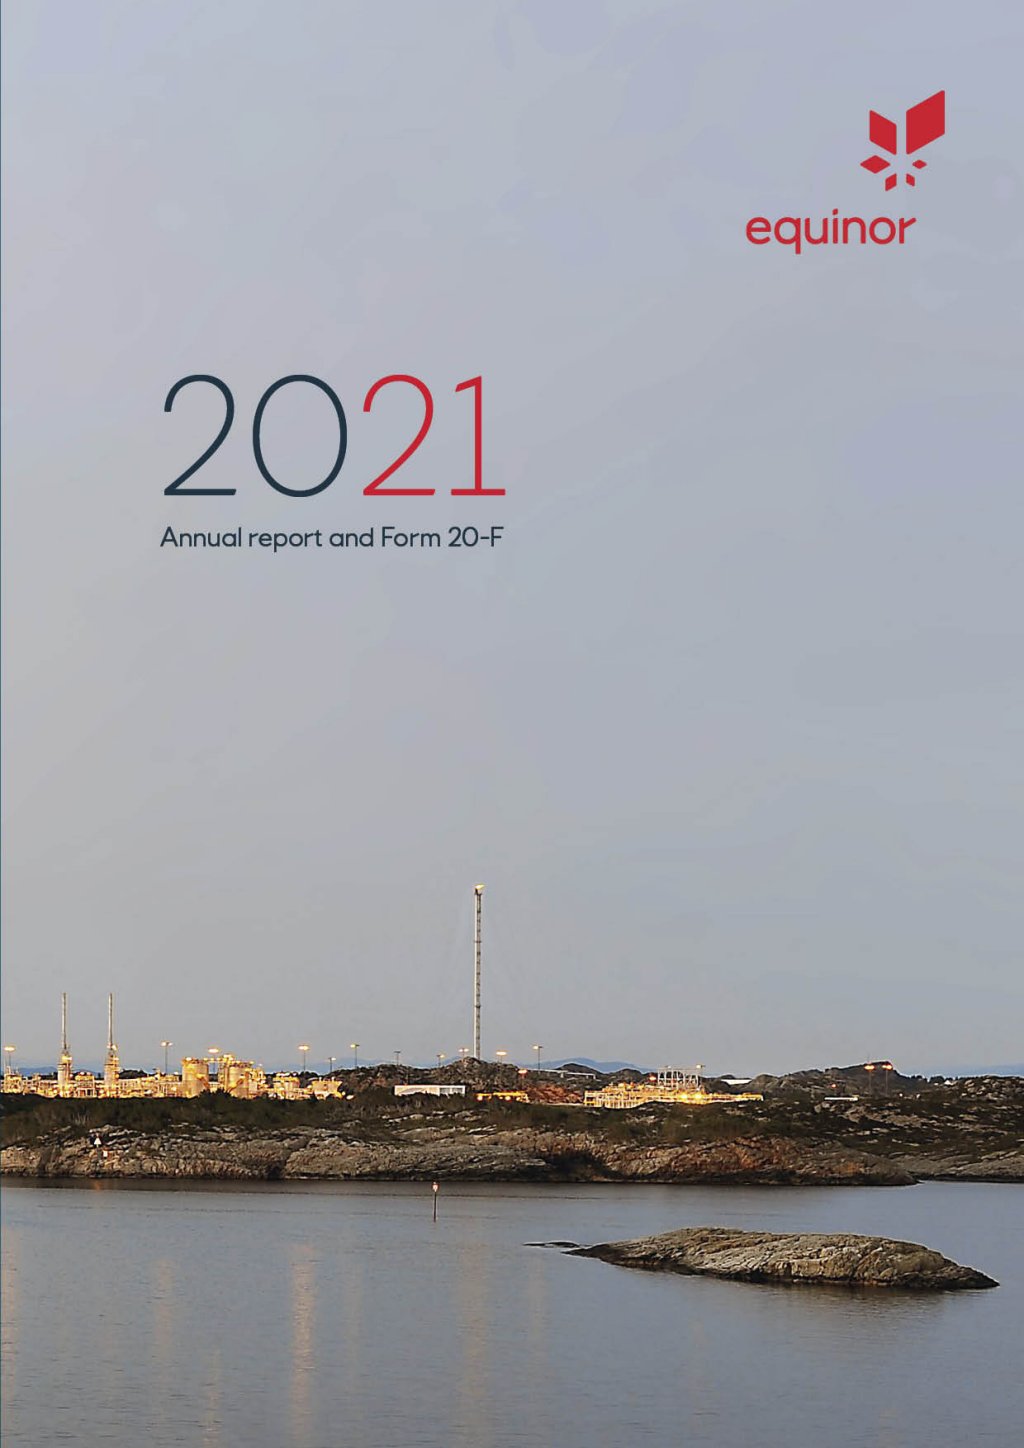 annual reports equinor com calculating interest expense on income statement southern baptist convention financial statements